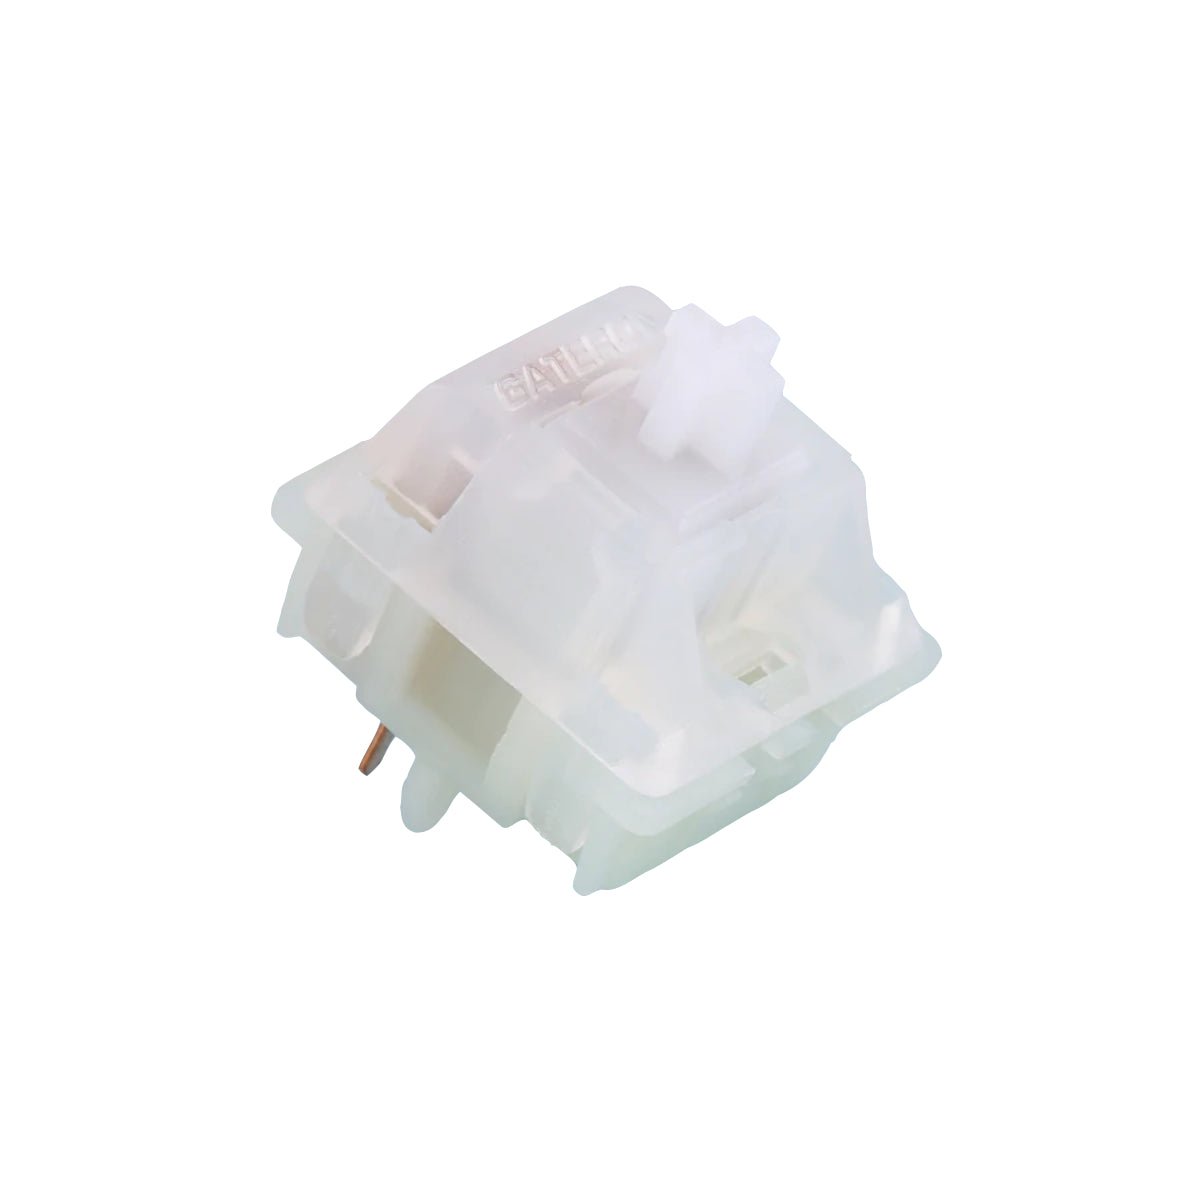 KBD Fans Gateron Milky Housing Switches - Clear - Store 974 | ستور ٩٧٤